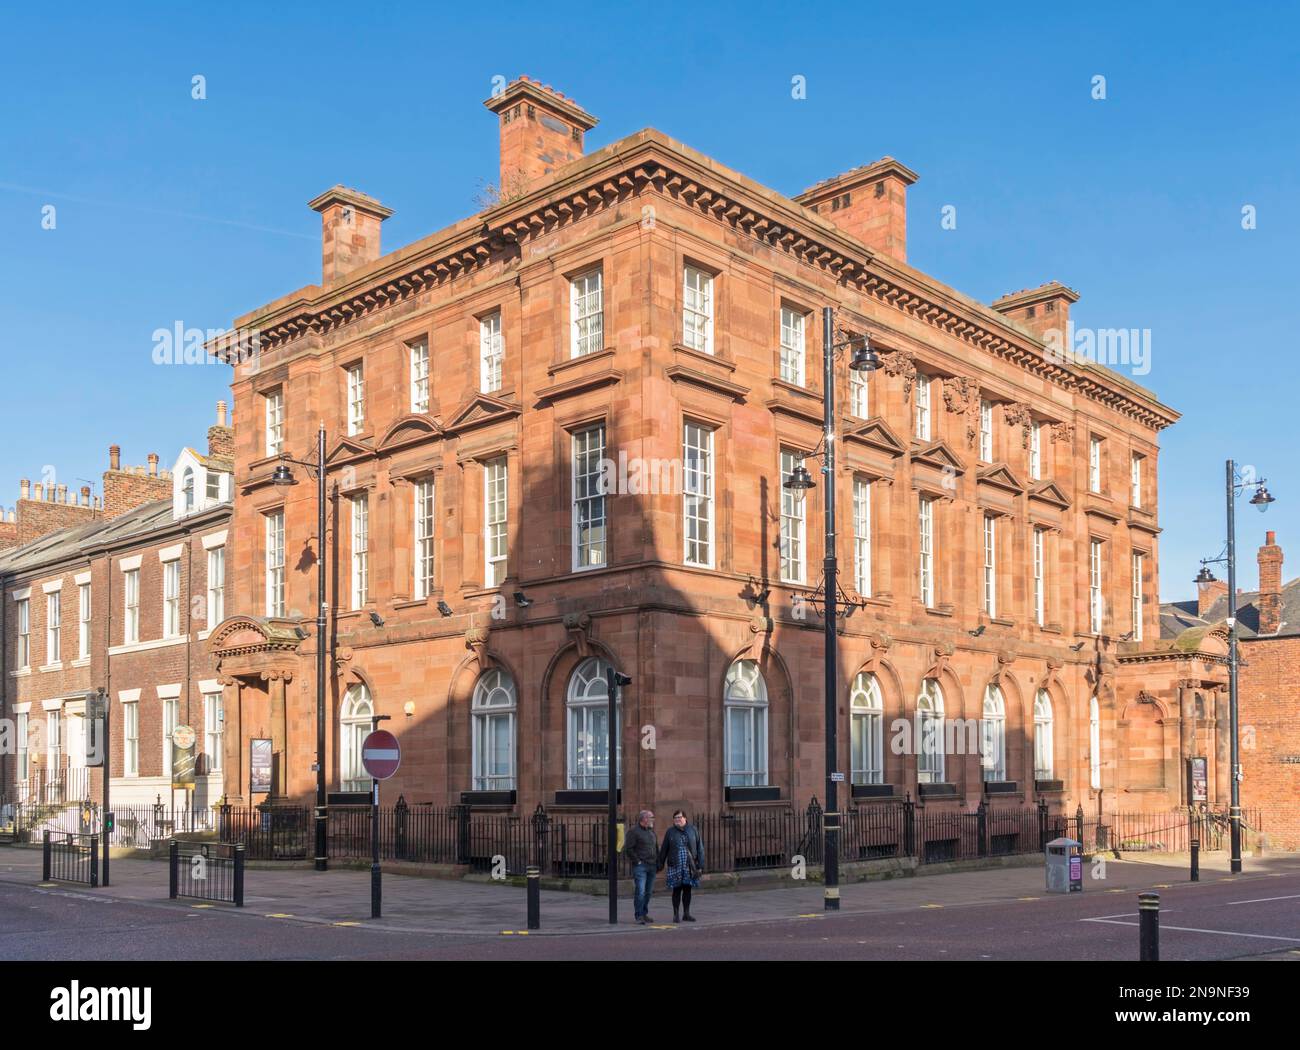 Hawksley House, a listed early 20th century office neoclassical building, now apartments, in Sunderland, England, UK Stock Photo